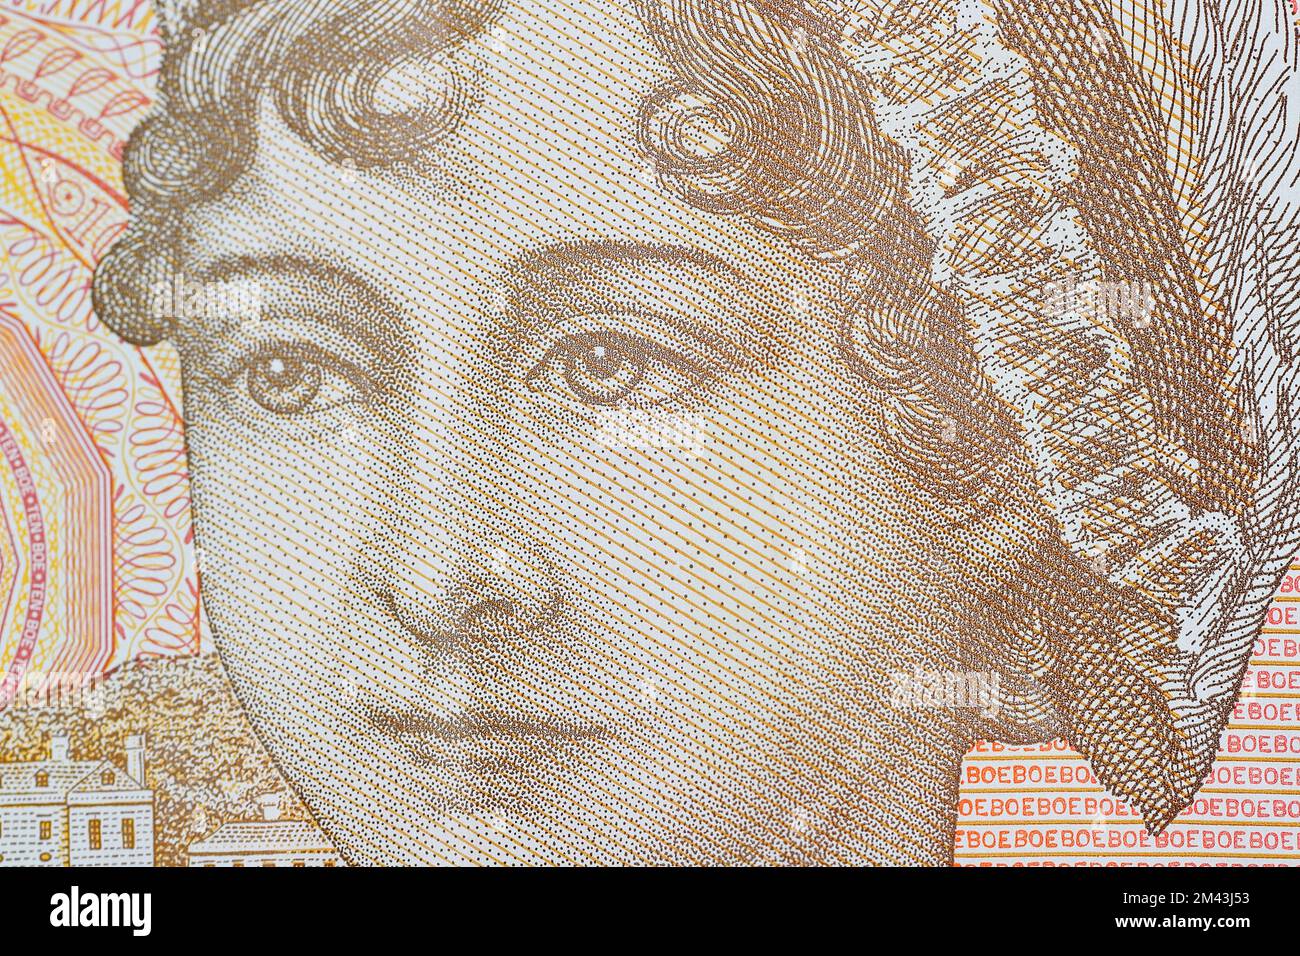 Close up of a Bank of England £10 note Stock Photo